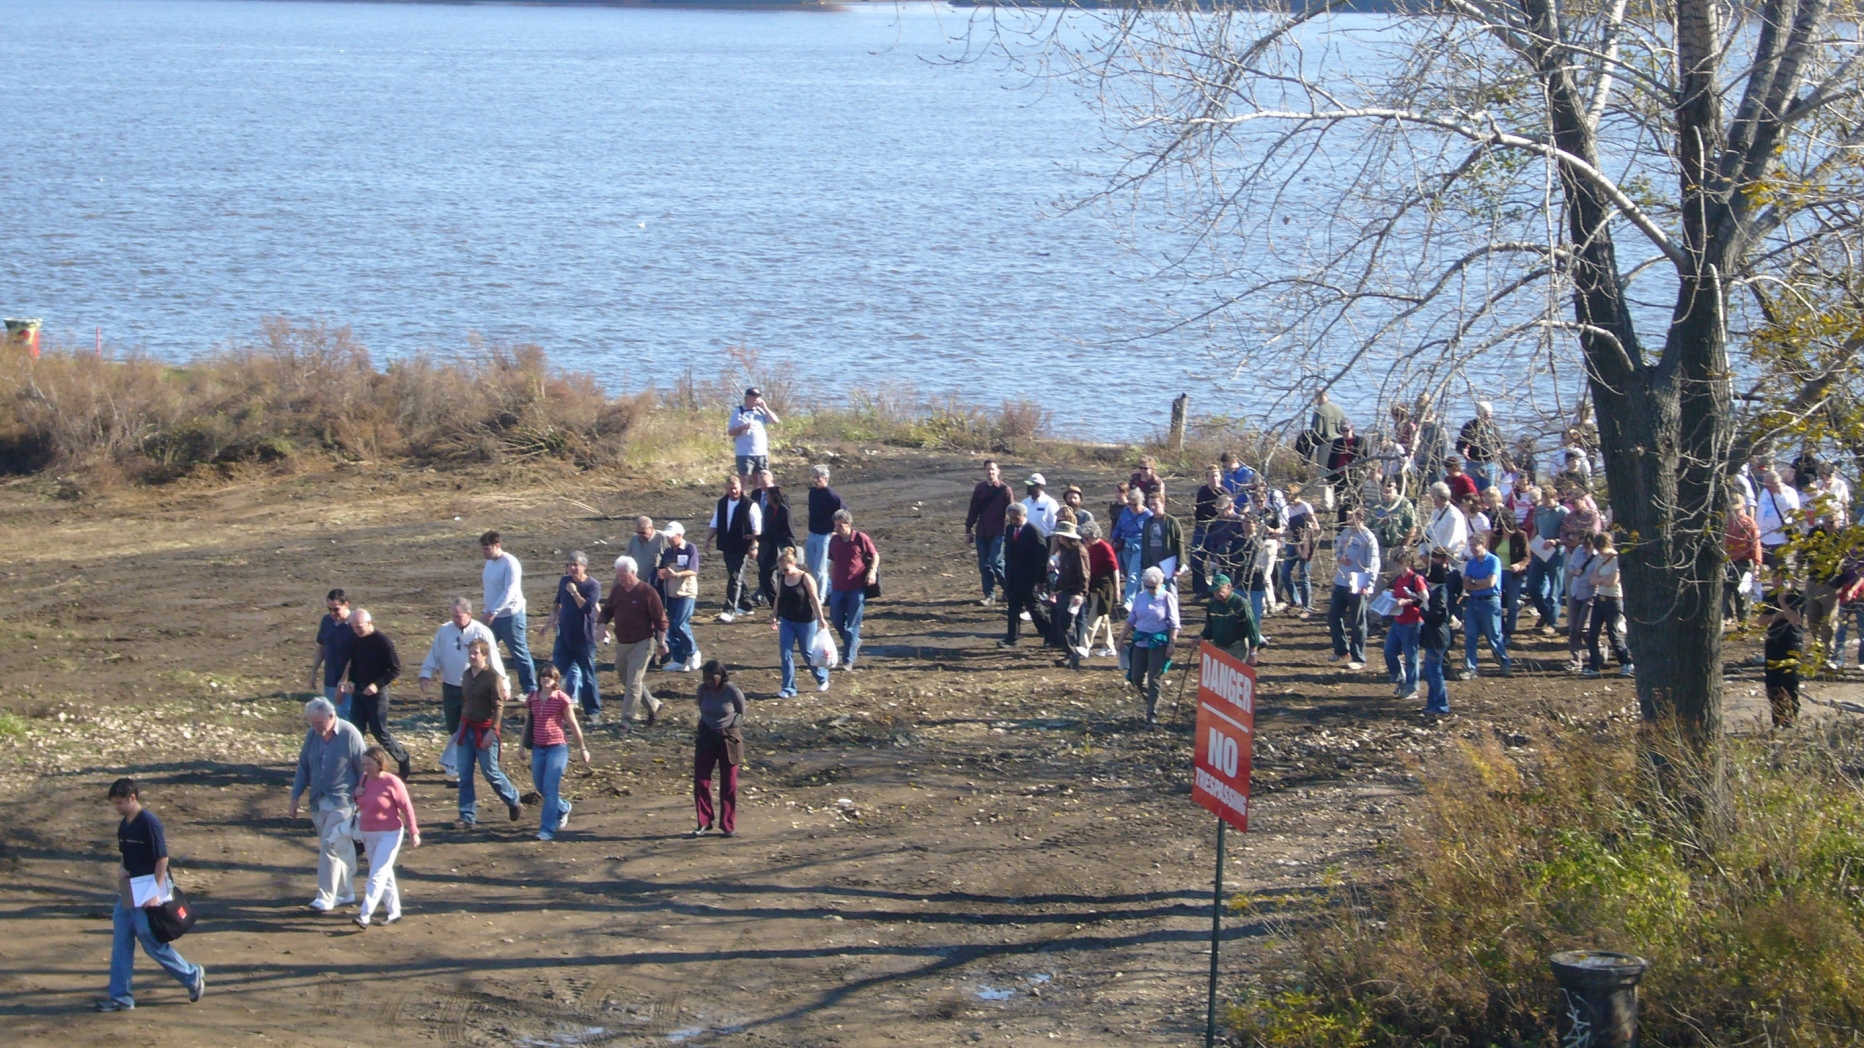 Crowd participating in the Central Delaware riverfront planning process walks along the Delaware river.